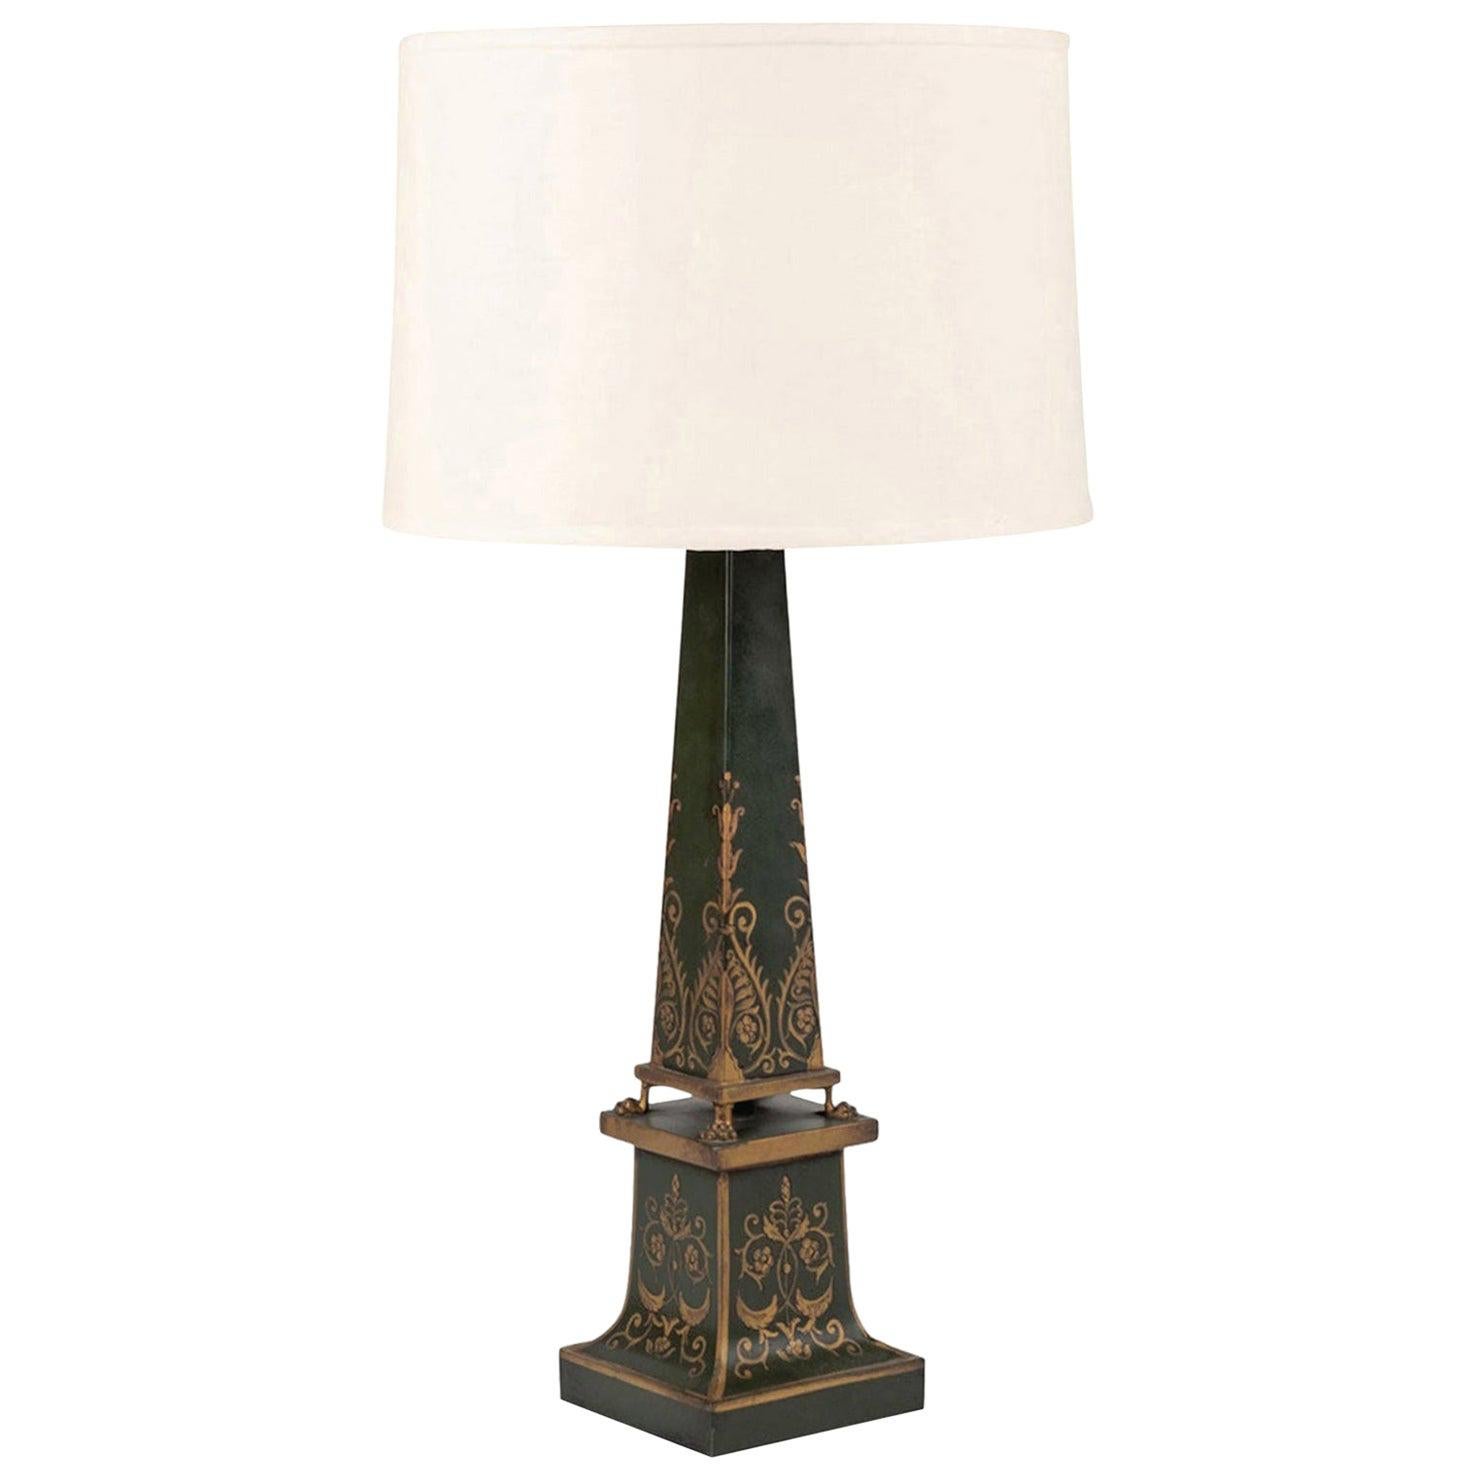 Antique Green Painted Tole Table Lamp